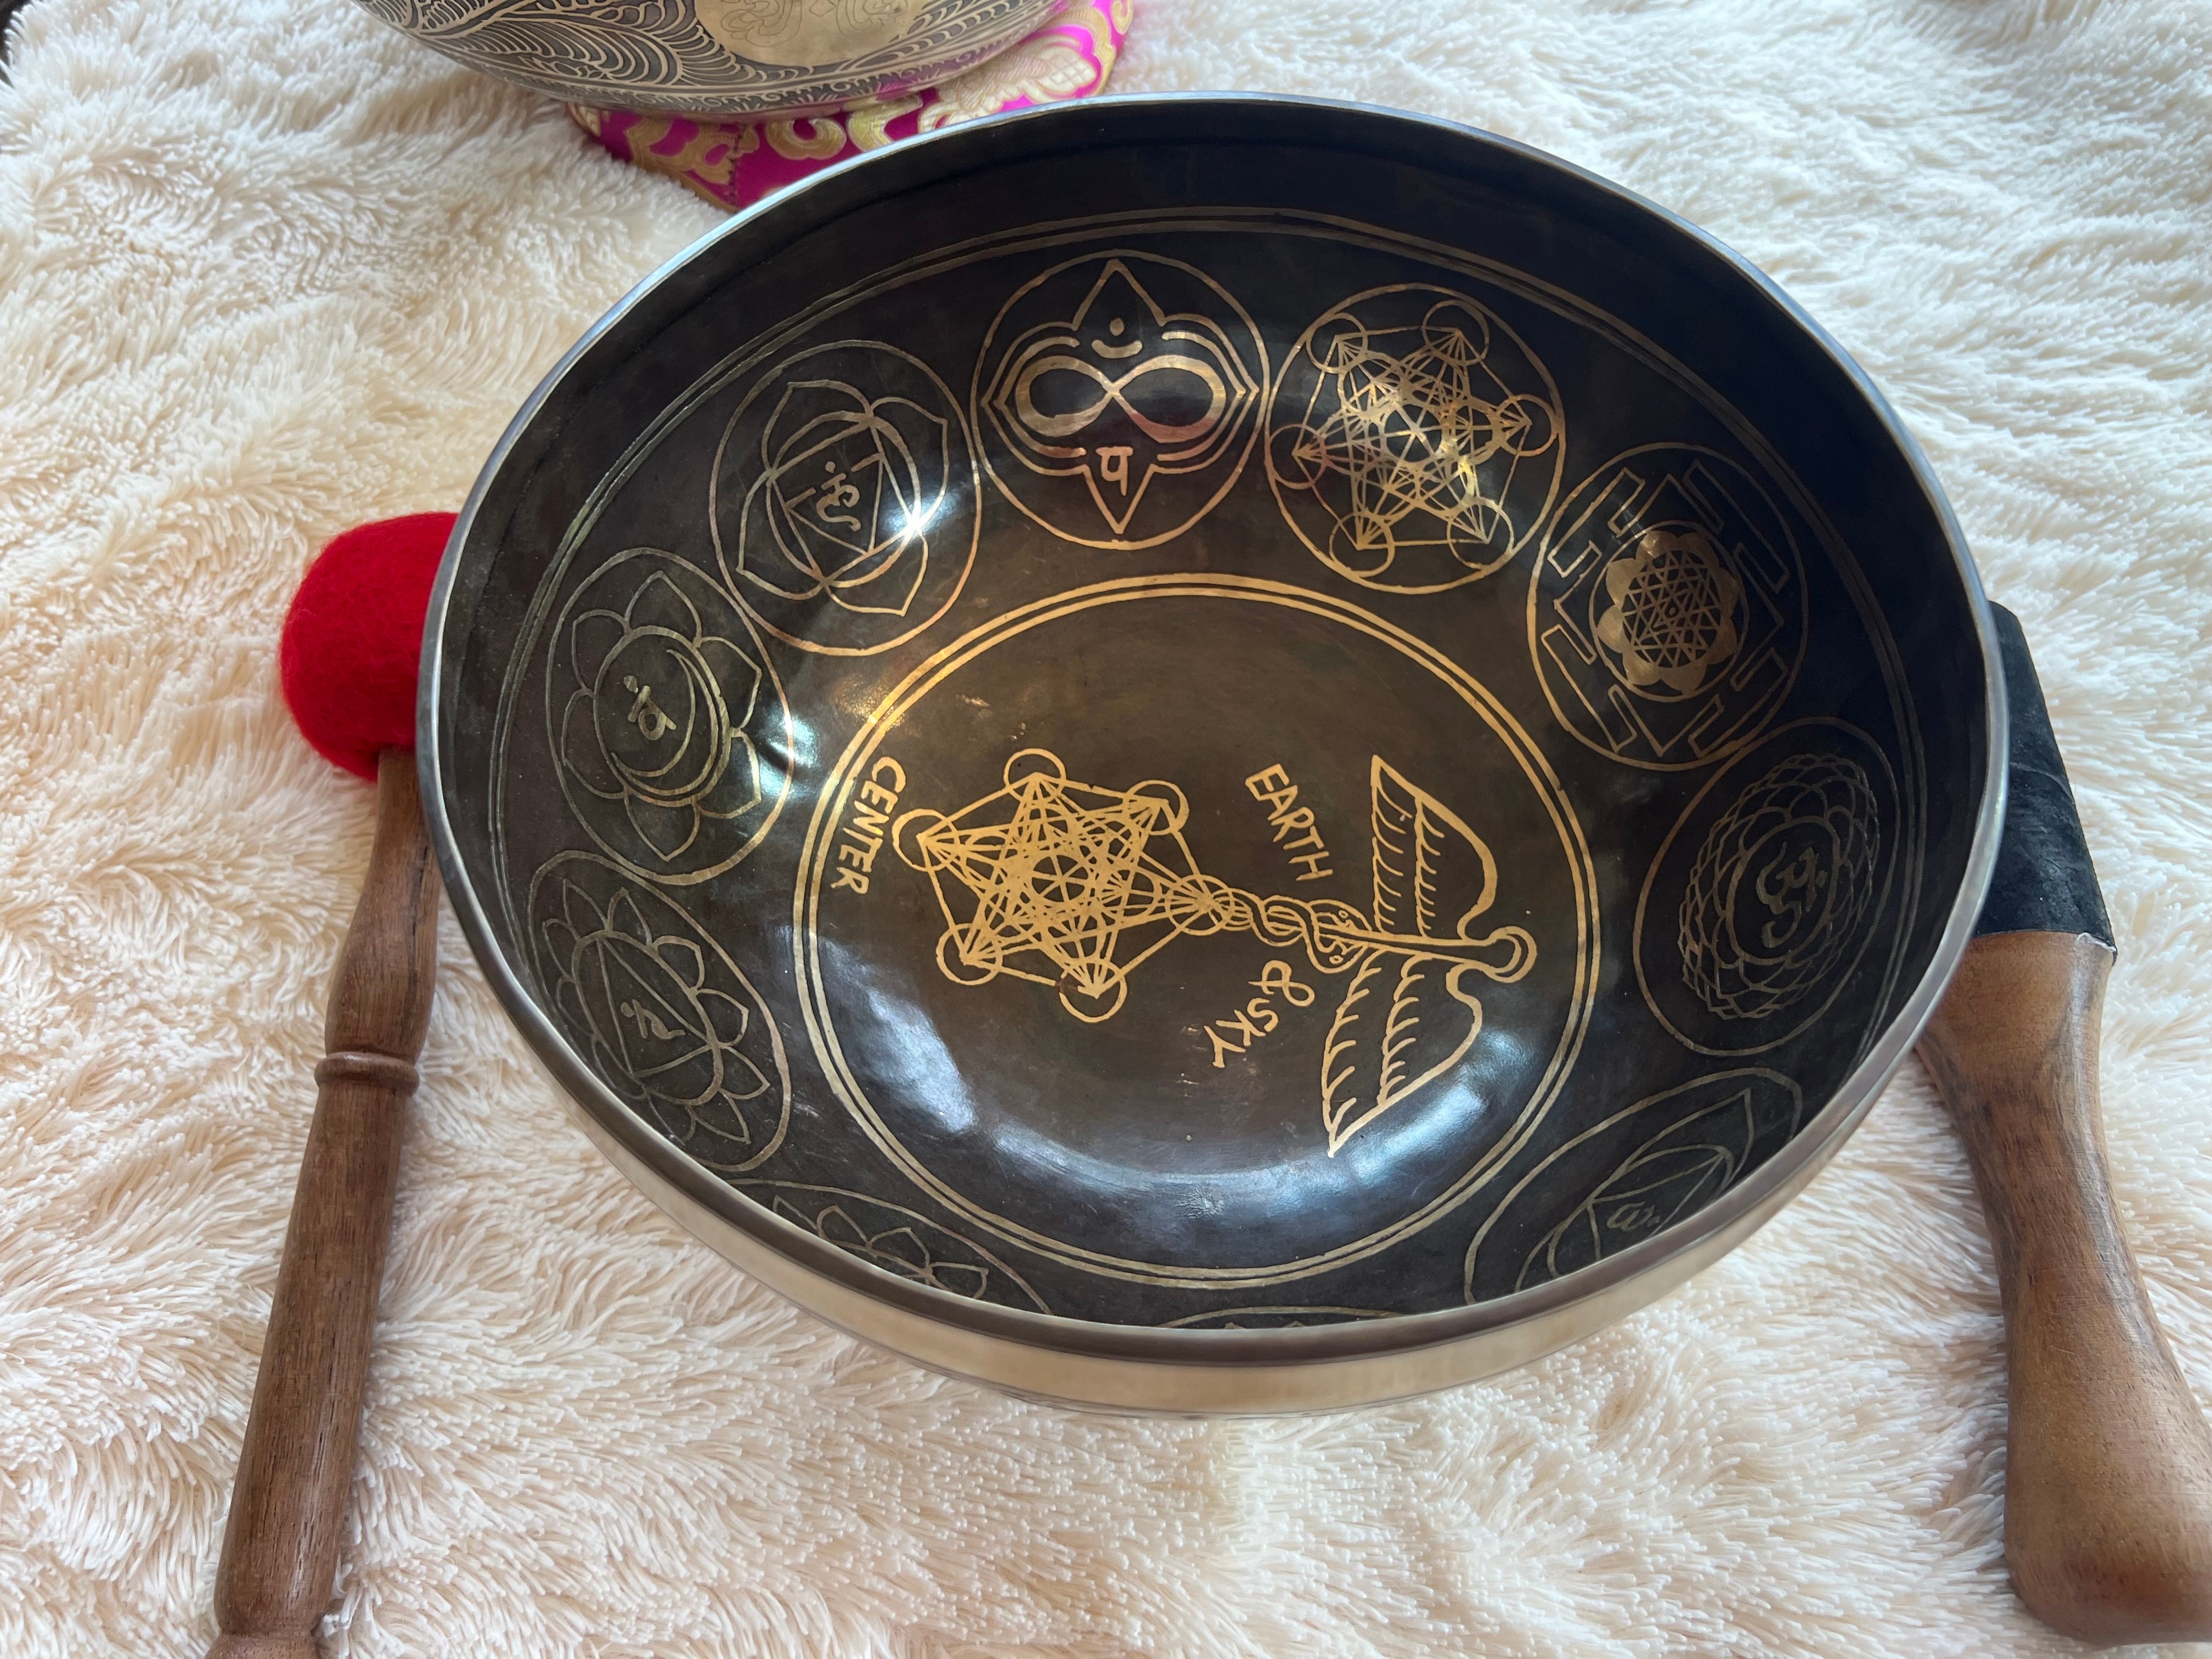 Earth, Sky, Center handmade with exquisite detailed Singing Bowls